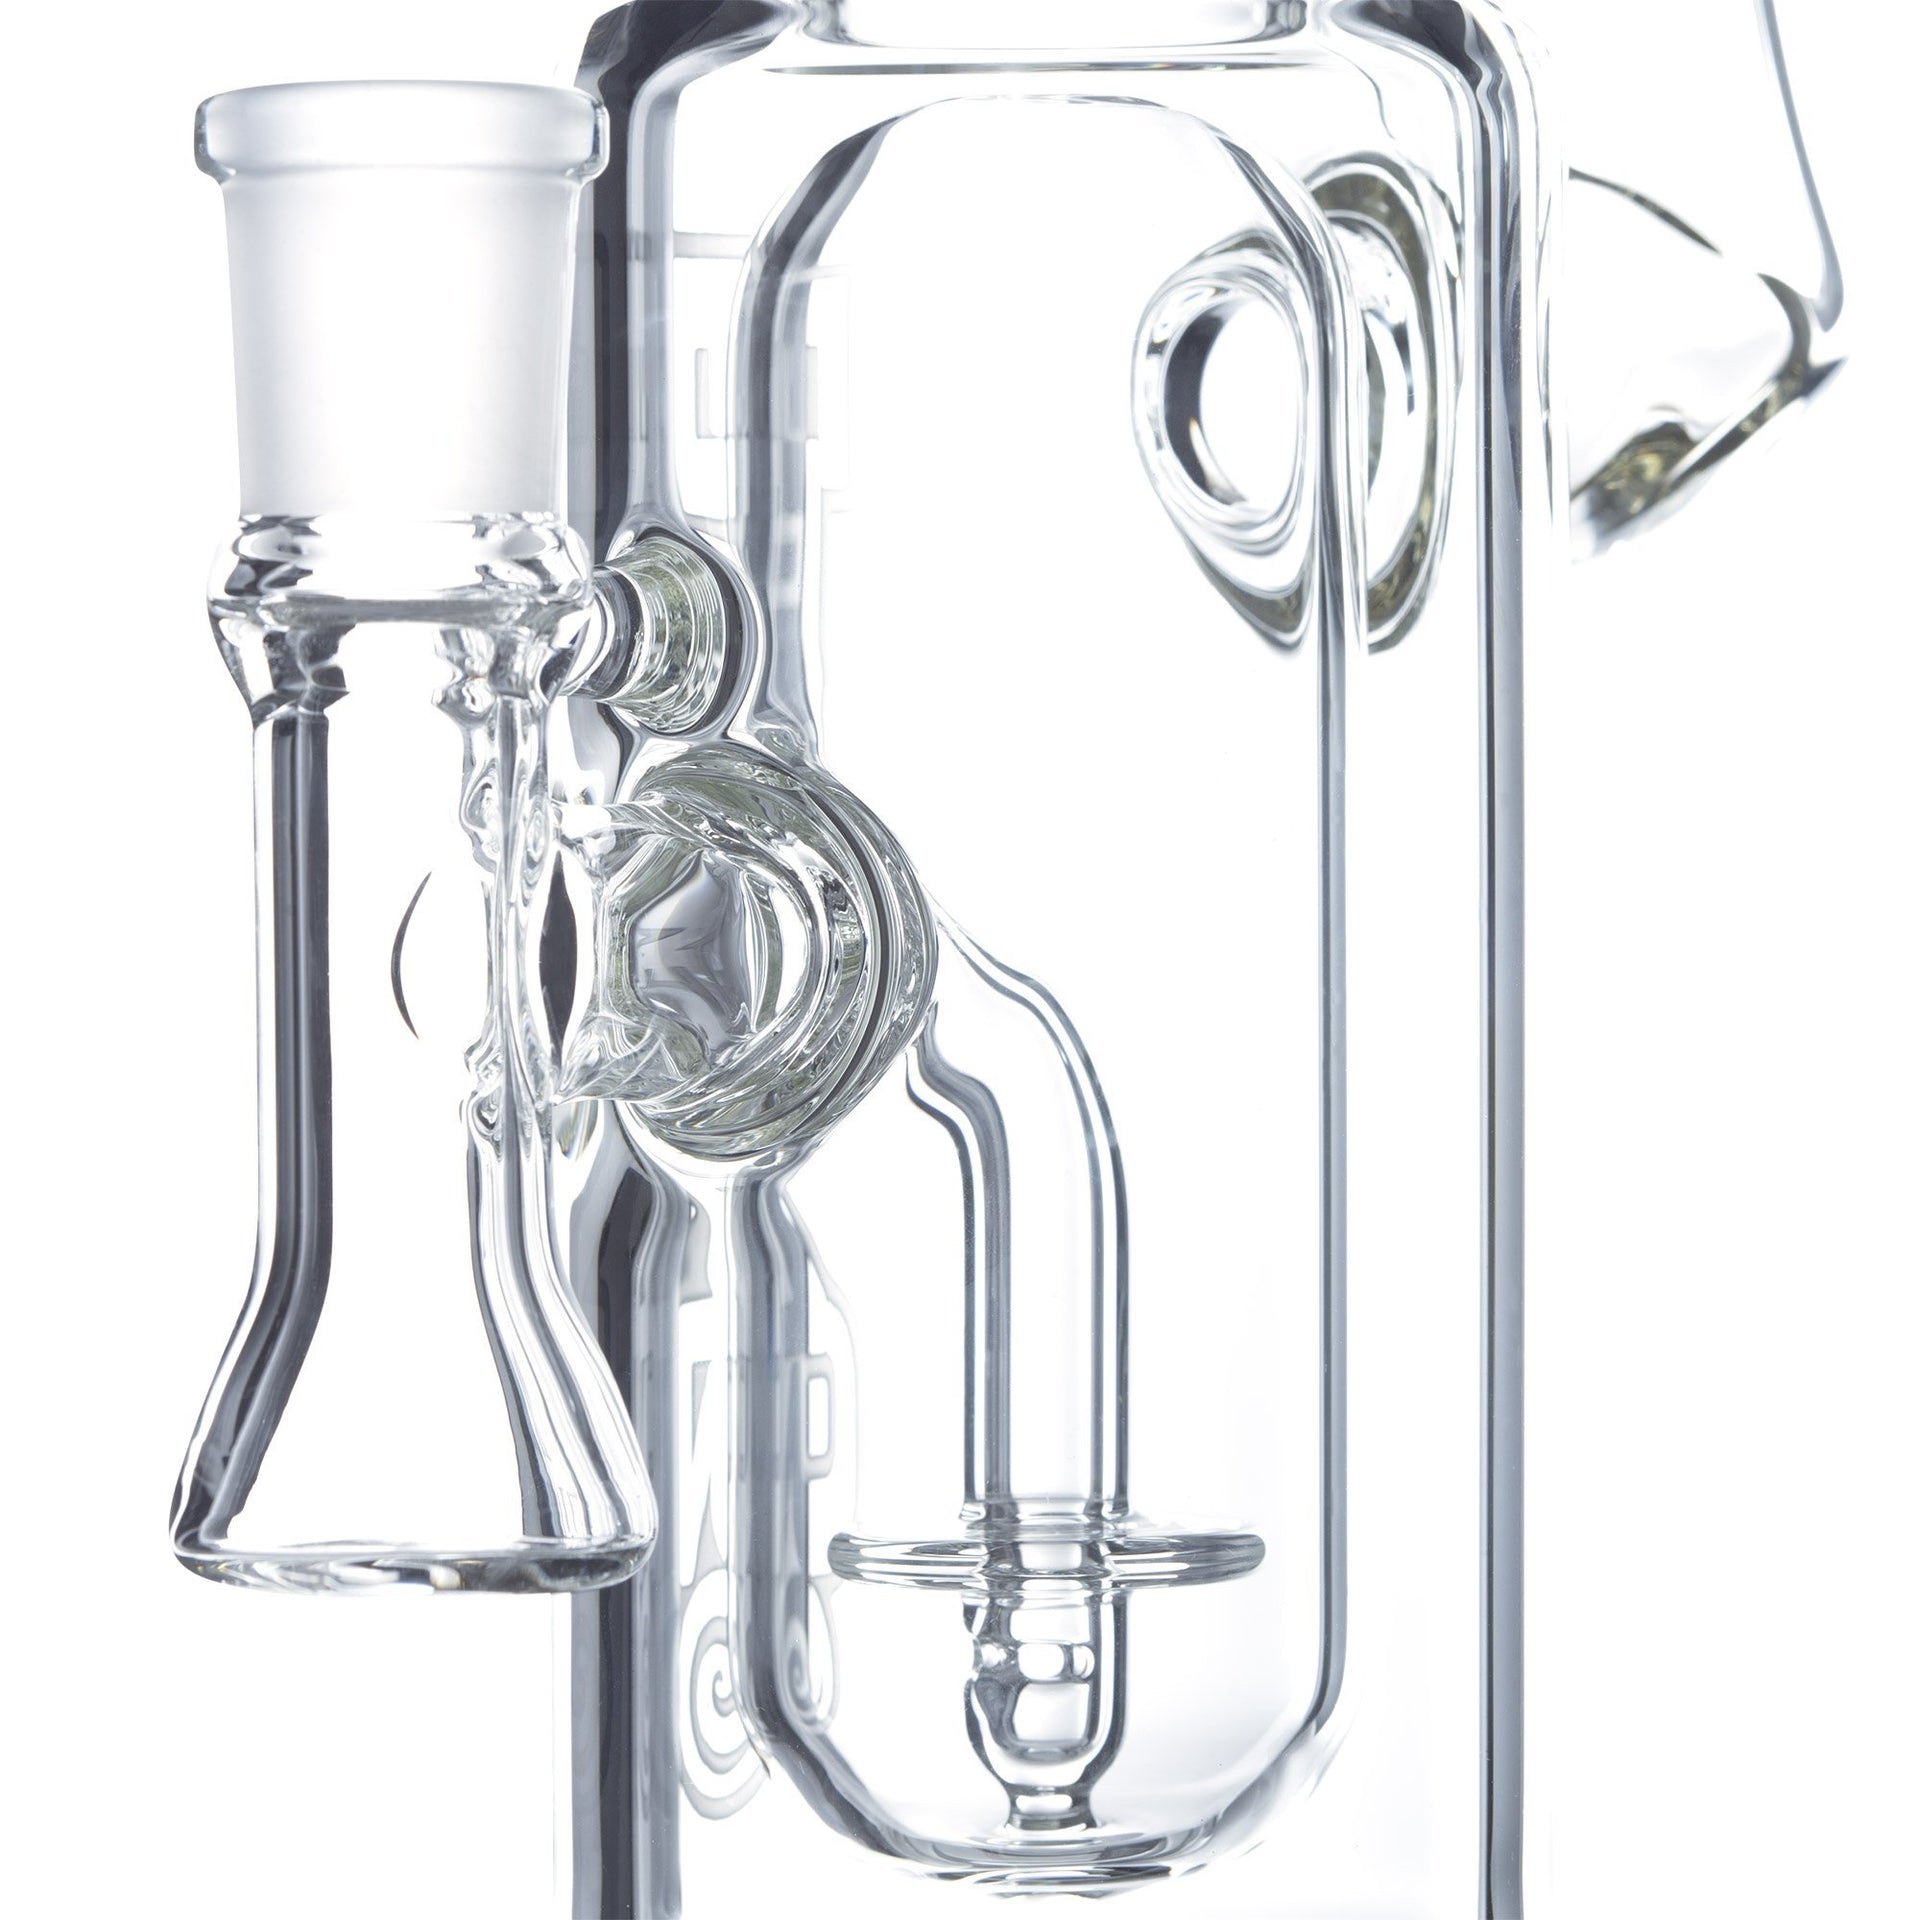 ROOR Tech x Eleven30 2-In-1 Beaker Bong/Dab Rig - 420 Science - The most trusted online smoke shop.